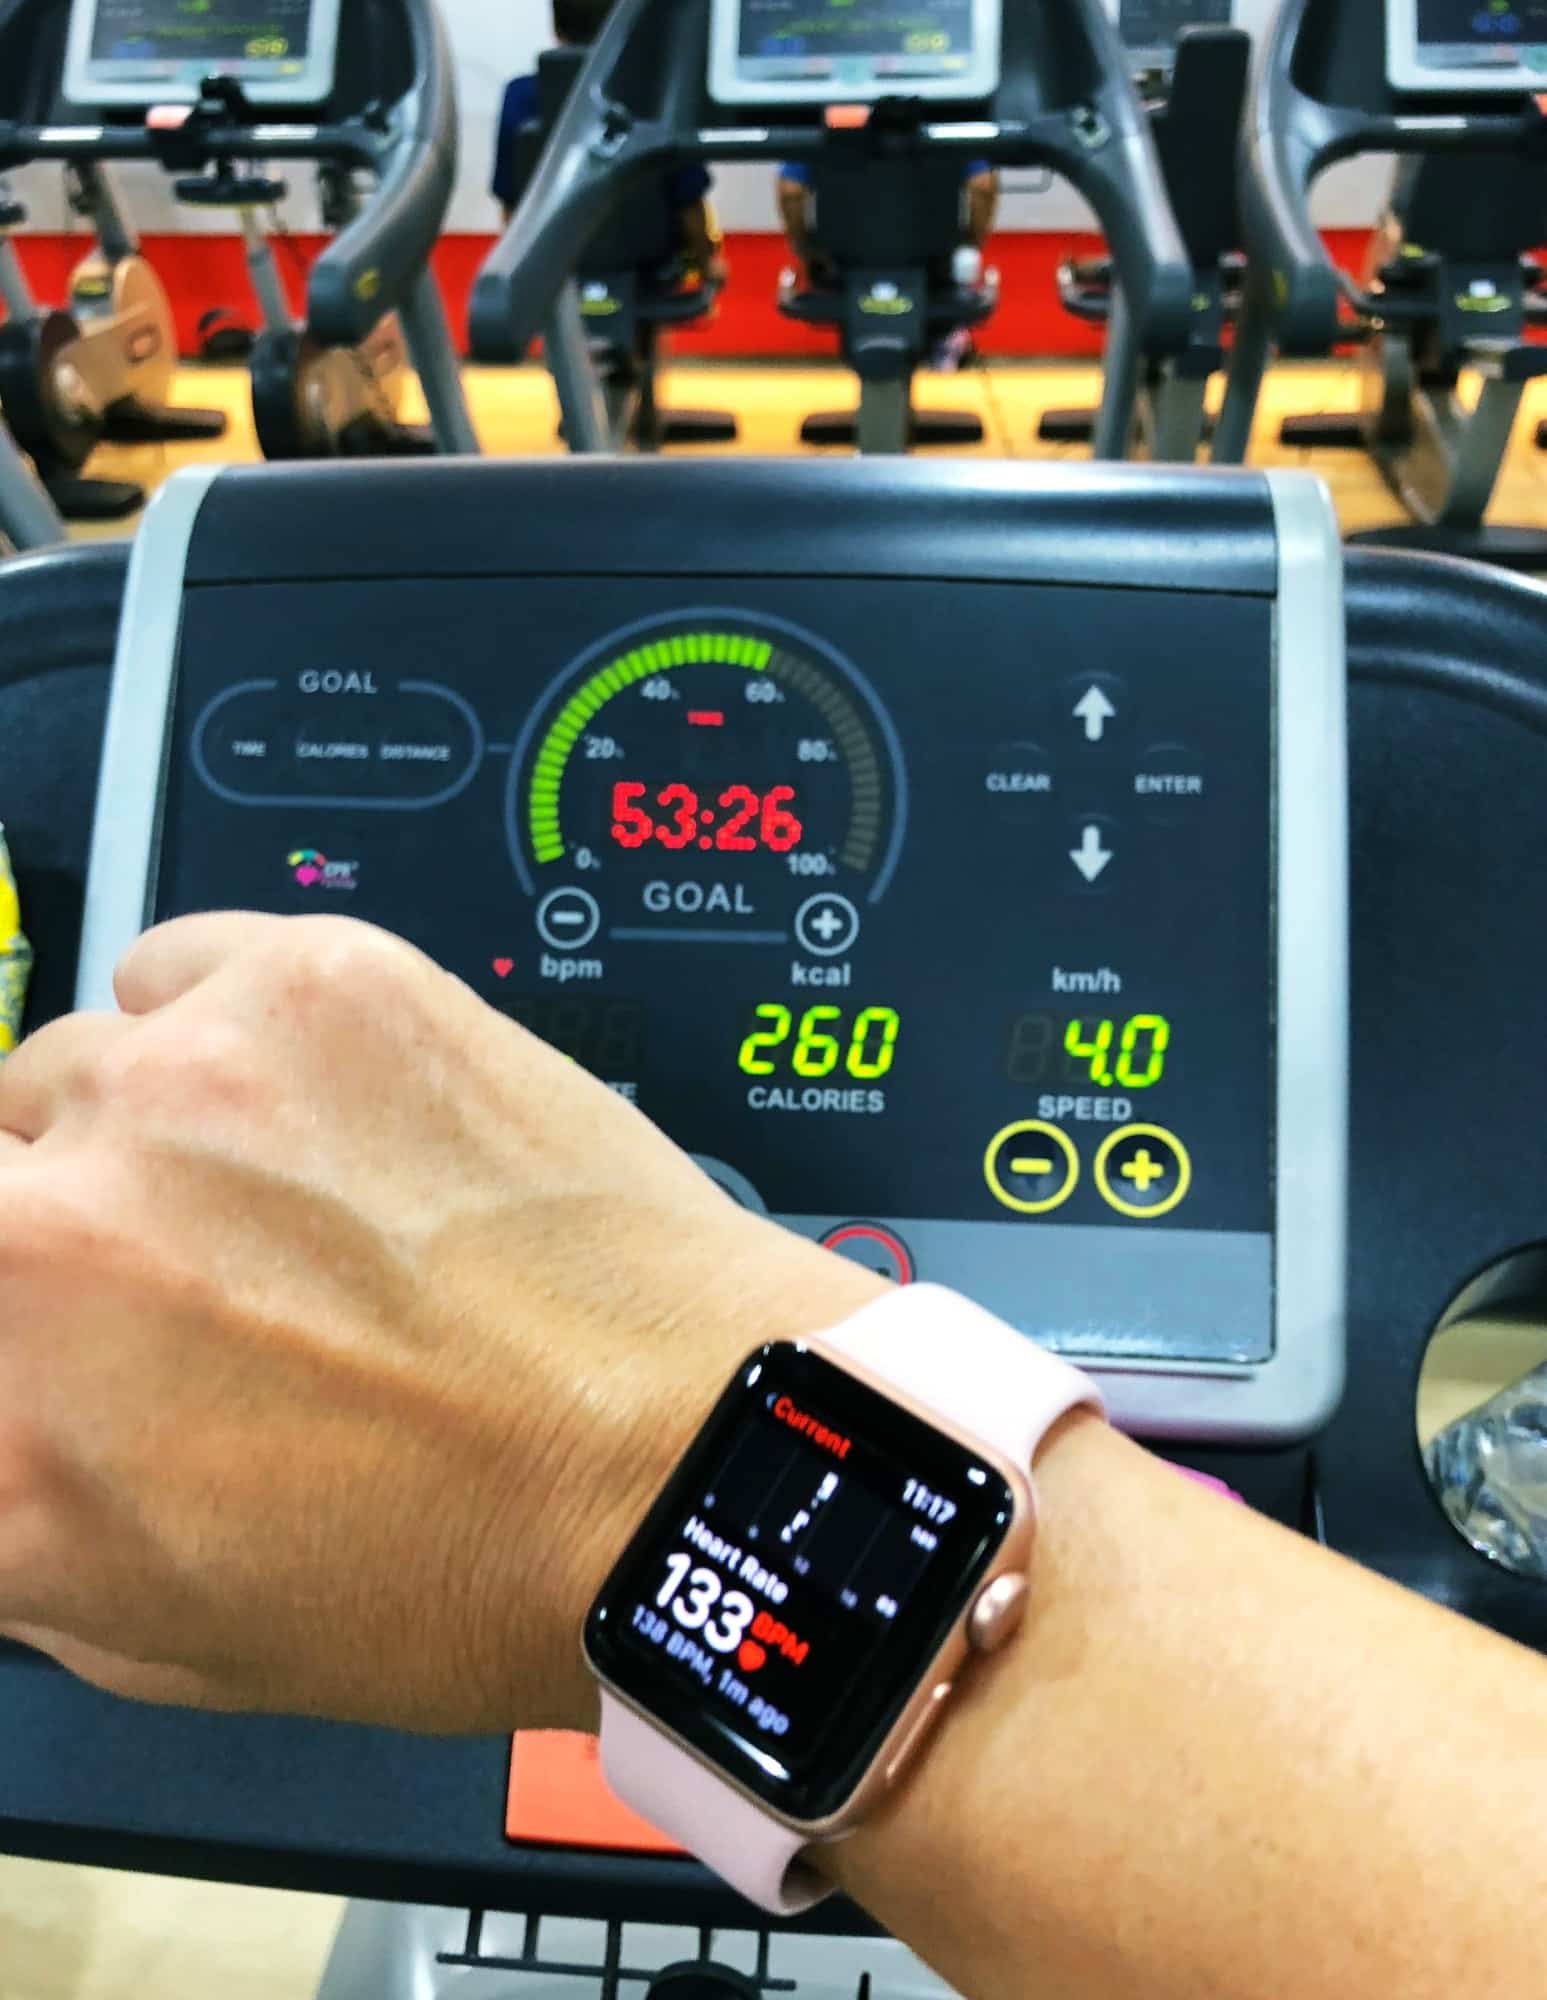 Woman look at exercise results on sport watch on wrist after running on thread mill in fitness club